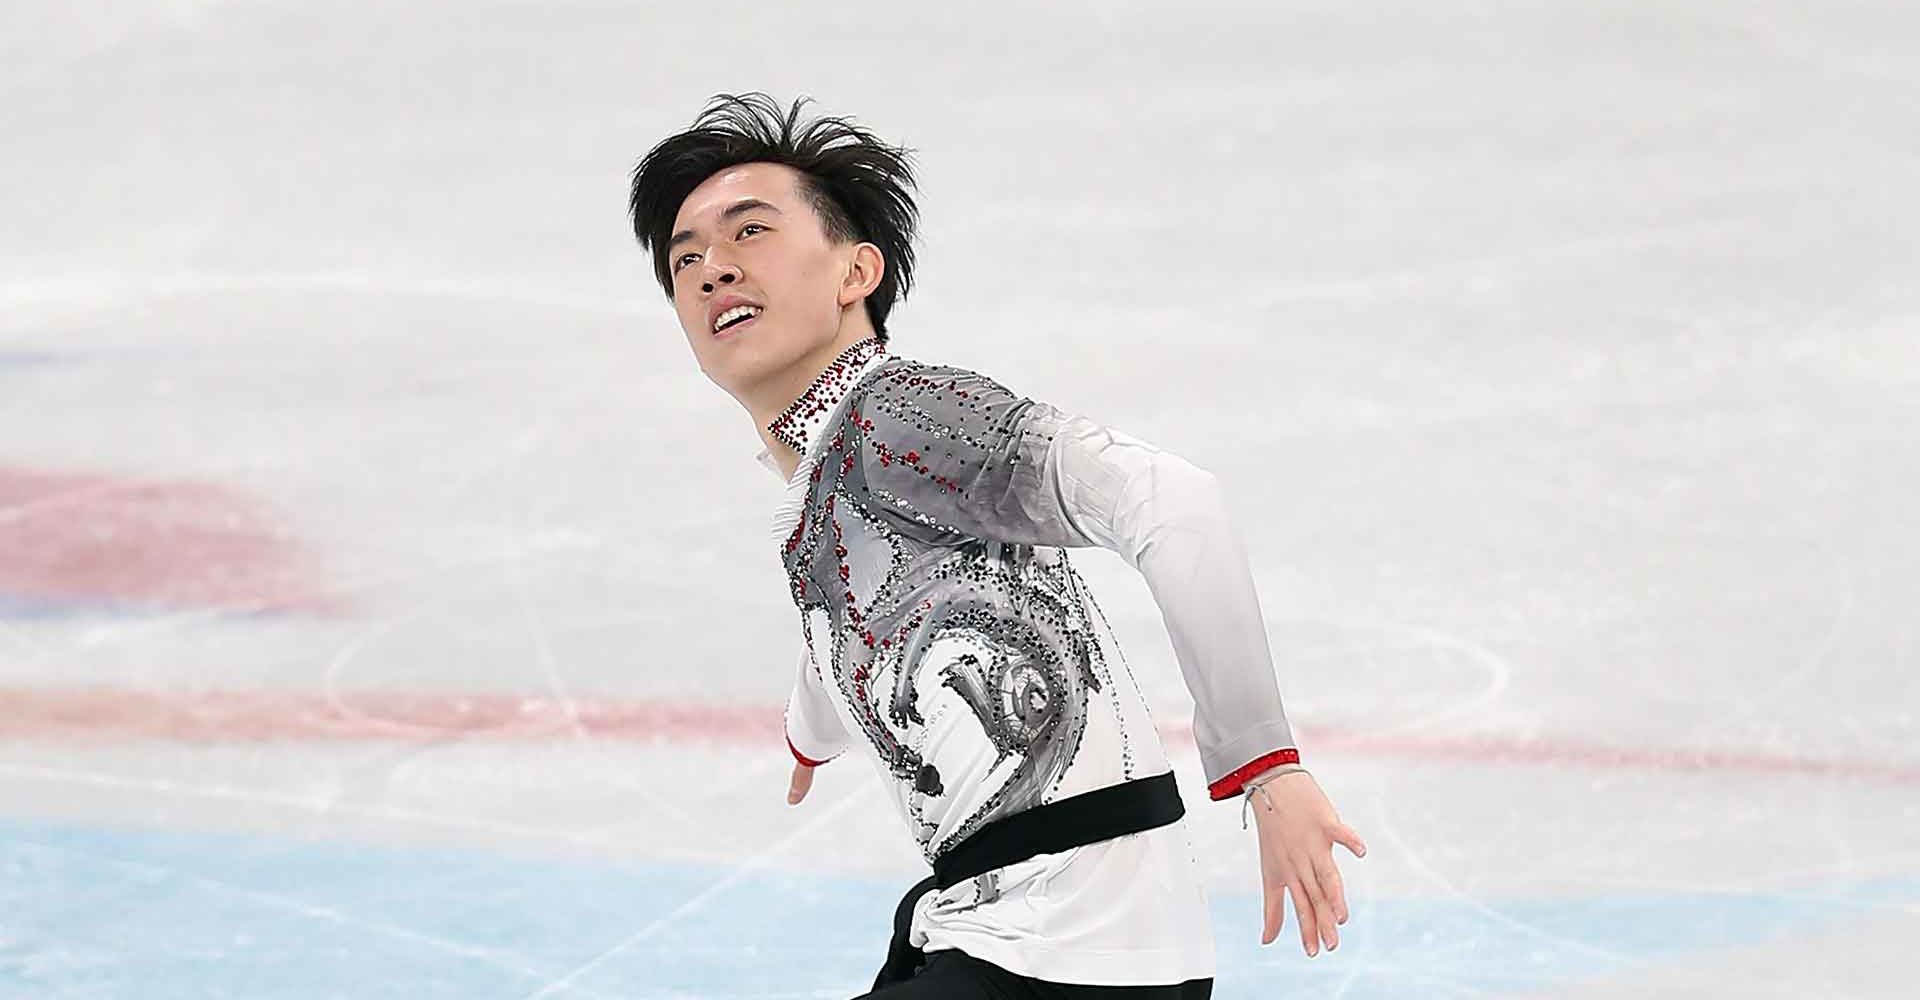 Vincent Zhou looking forward to gala after quarantine experience